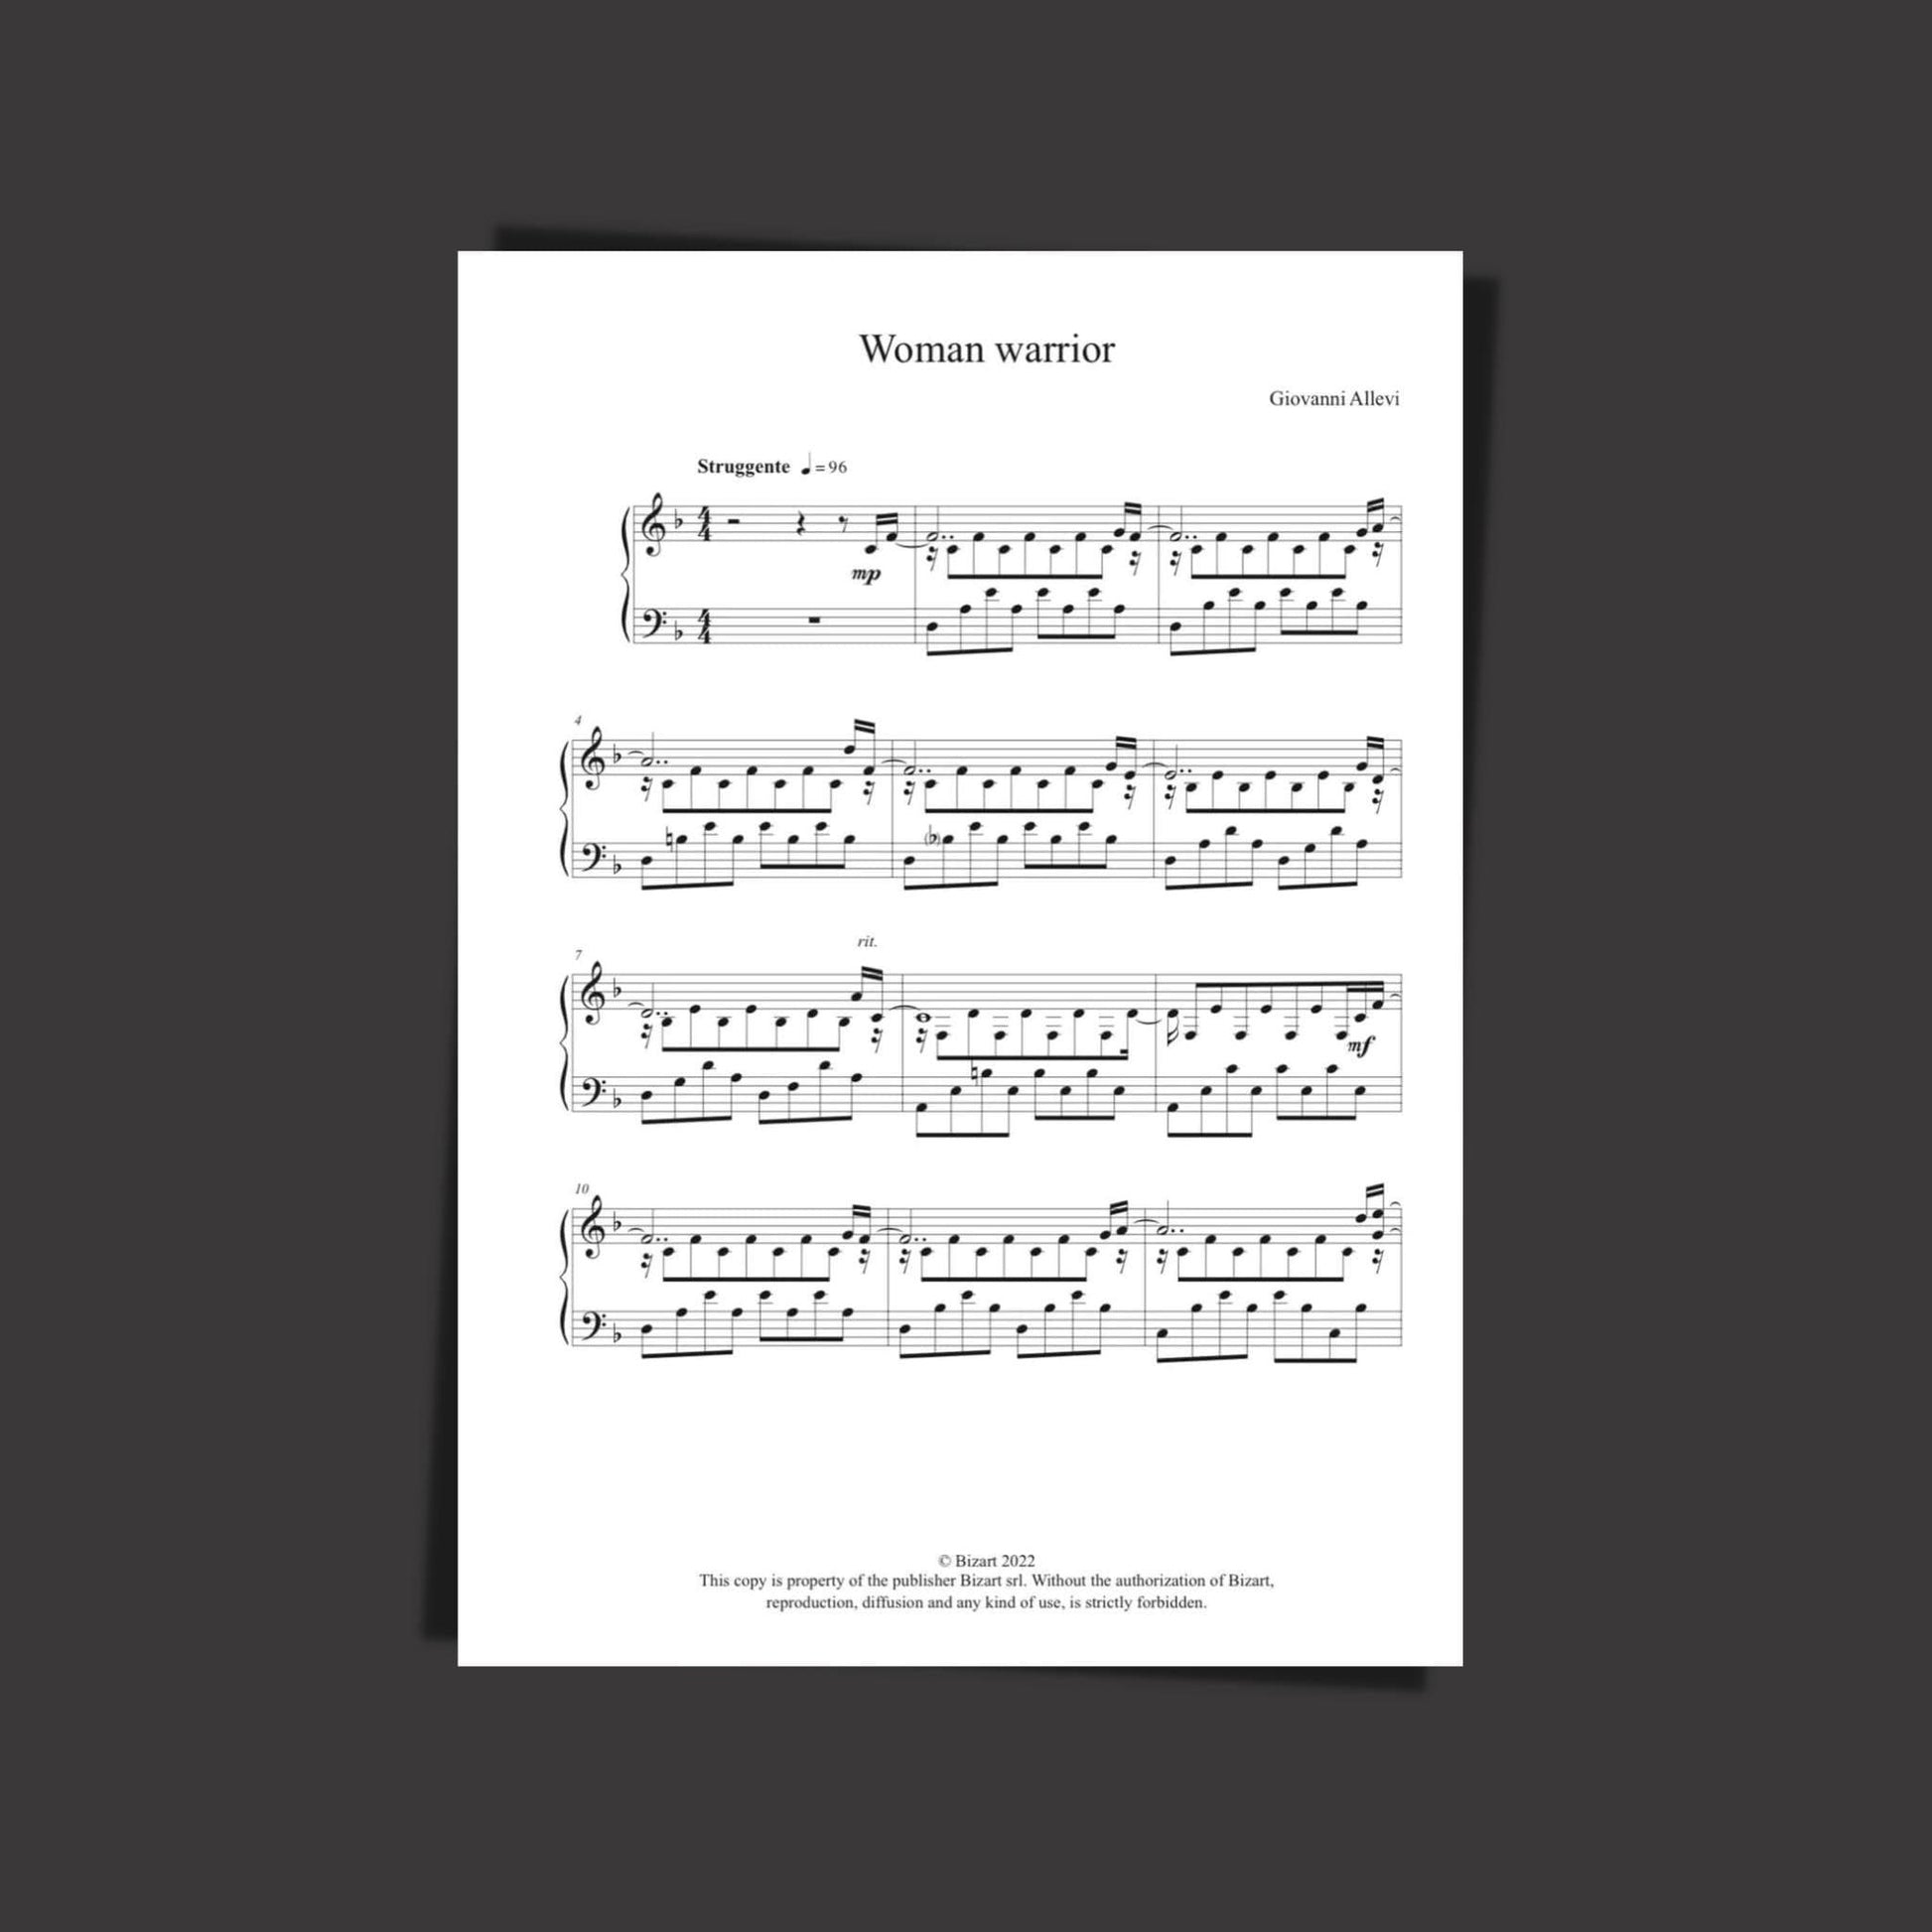 WOMAN WARRIOR by composer and pianist Giovanni Allevi digital sheet music for solo piano opening